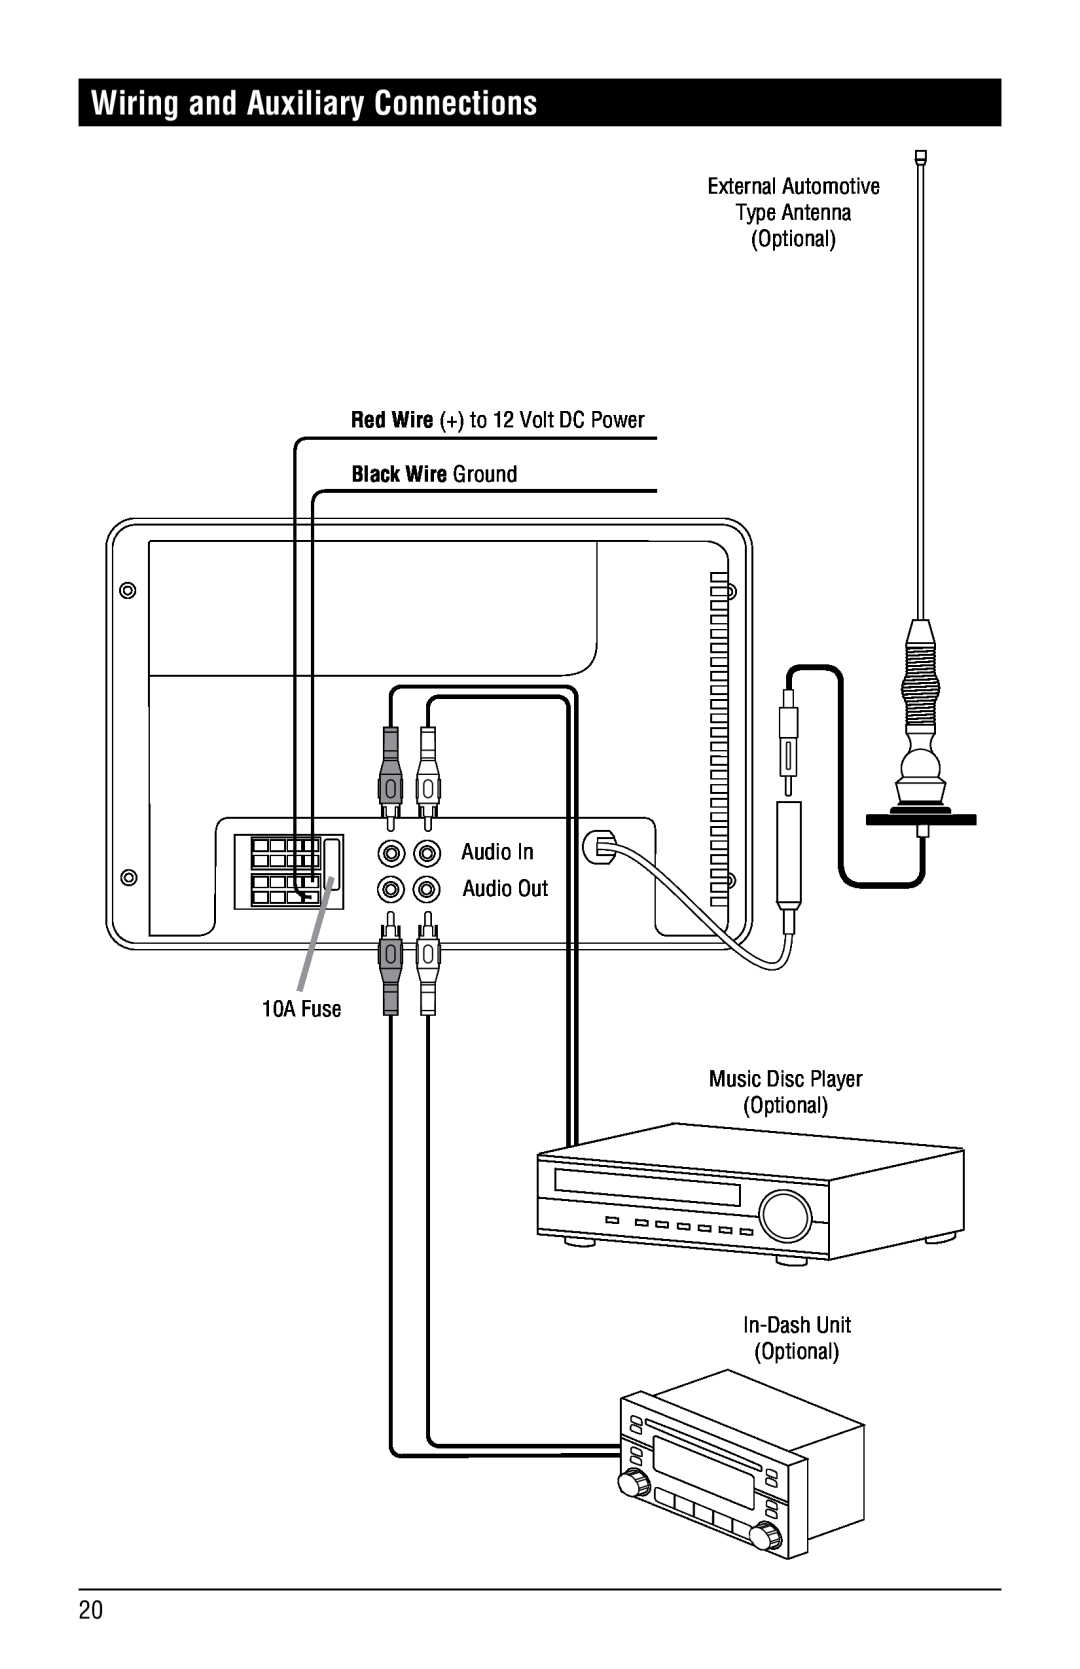 Magnadyne RV4000 installation manual Wiring and Auxiliary Connections, Black Wire Ground 